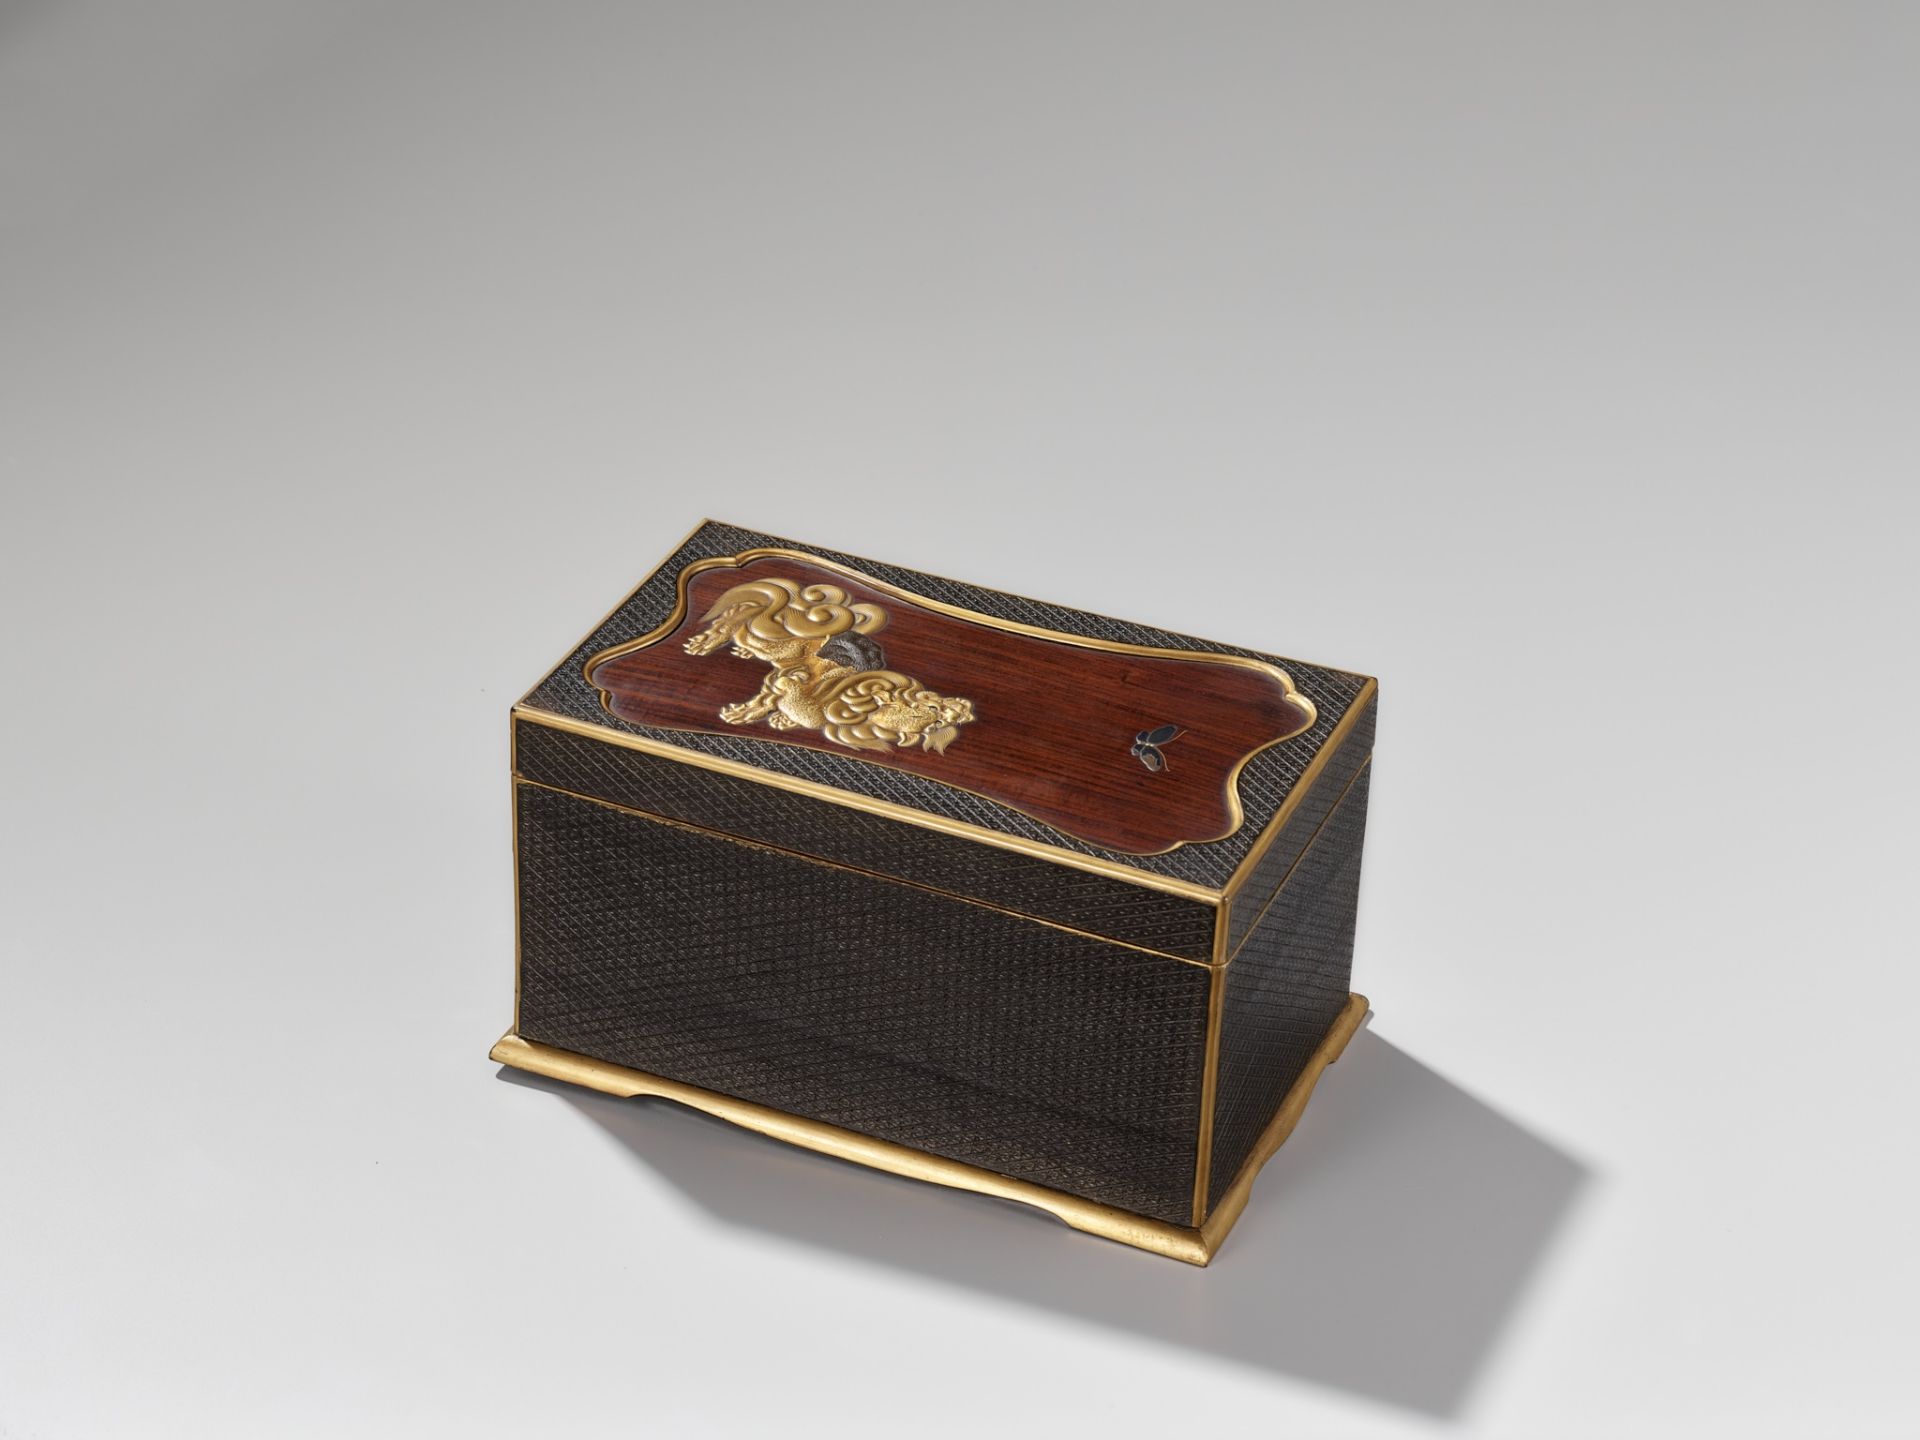 A RARE LACQUERED WOOD SUZURIBAKO (WRITING BOX) DEPICTING A SHISHI AND BUTTERFLY - Image 9 of 9